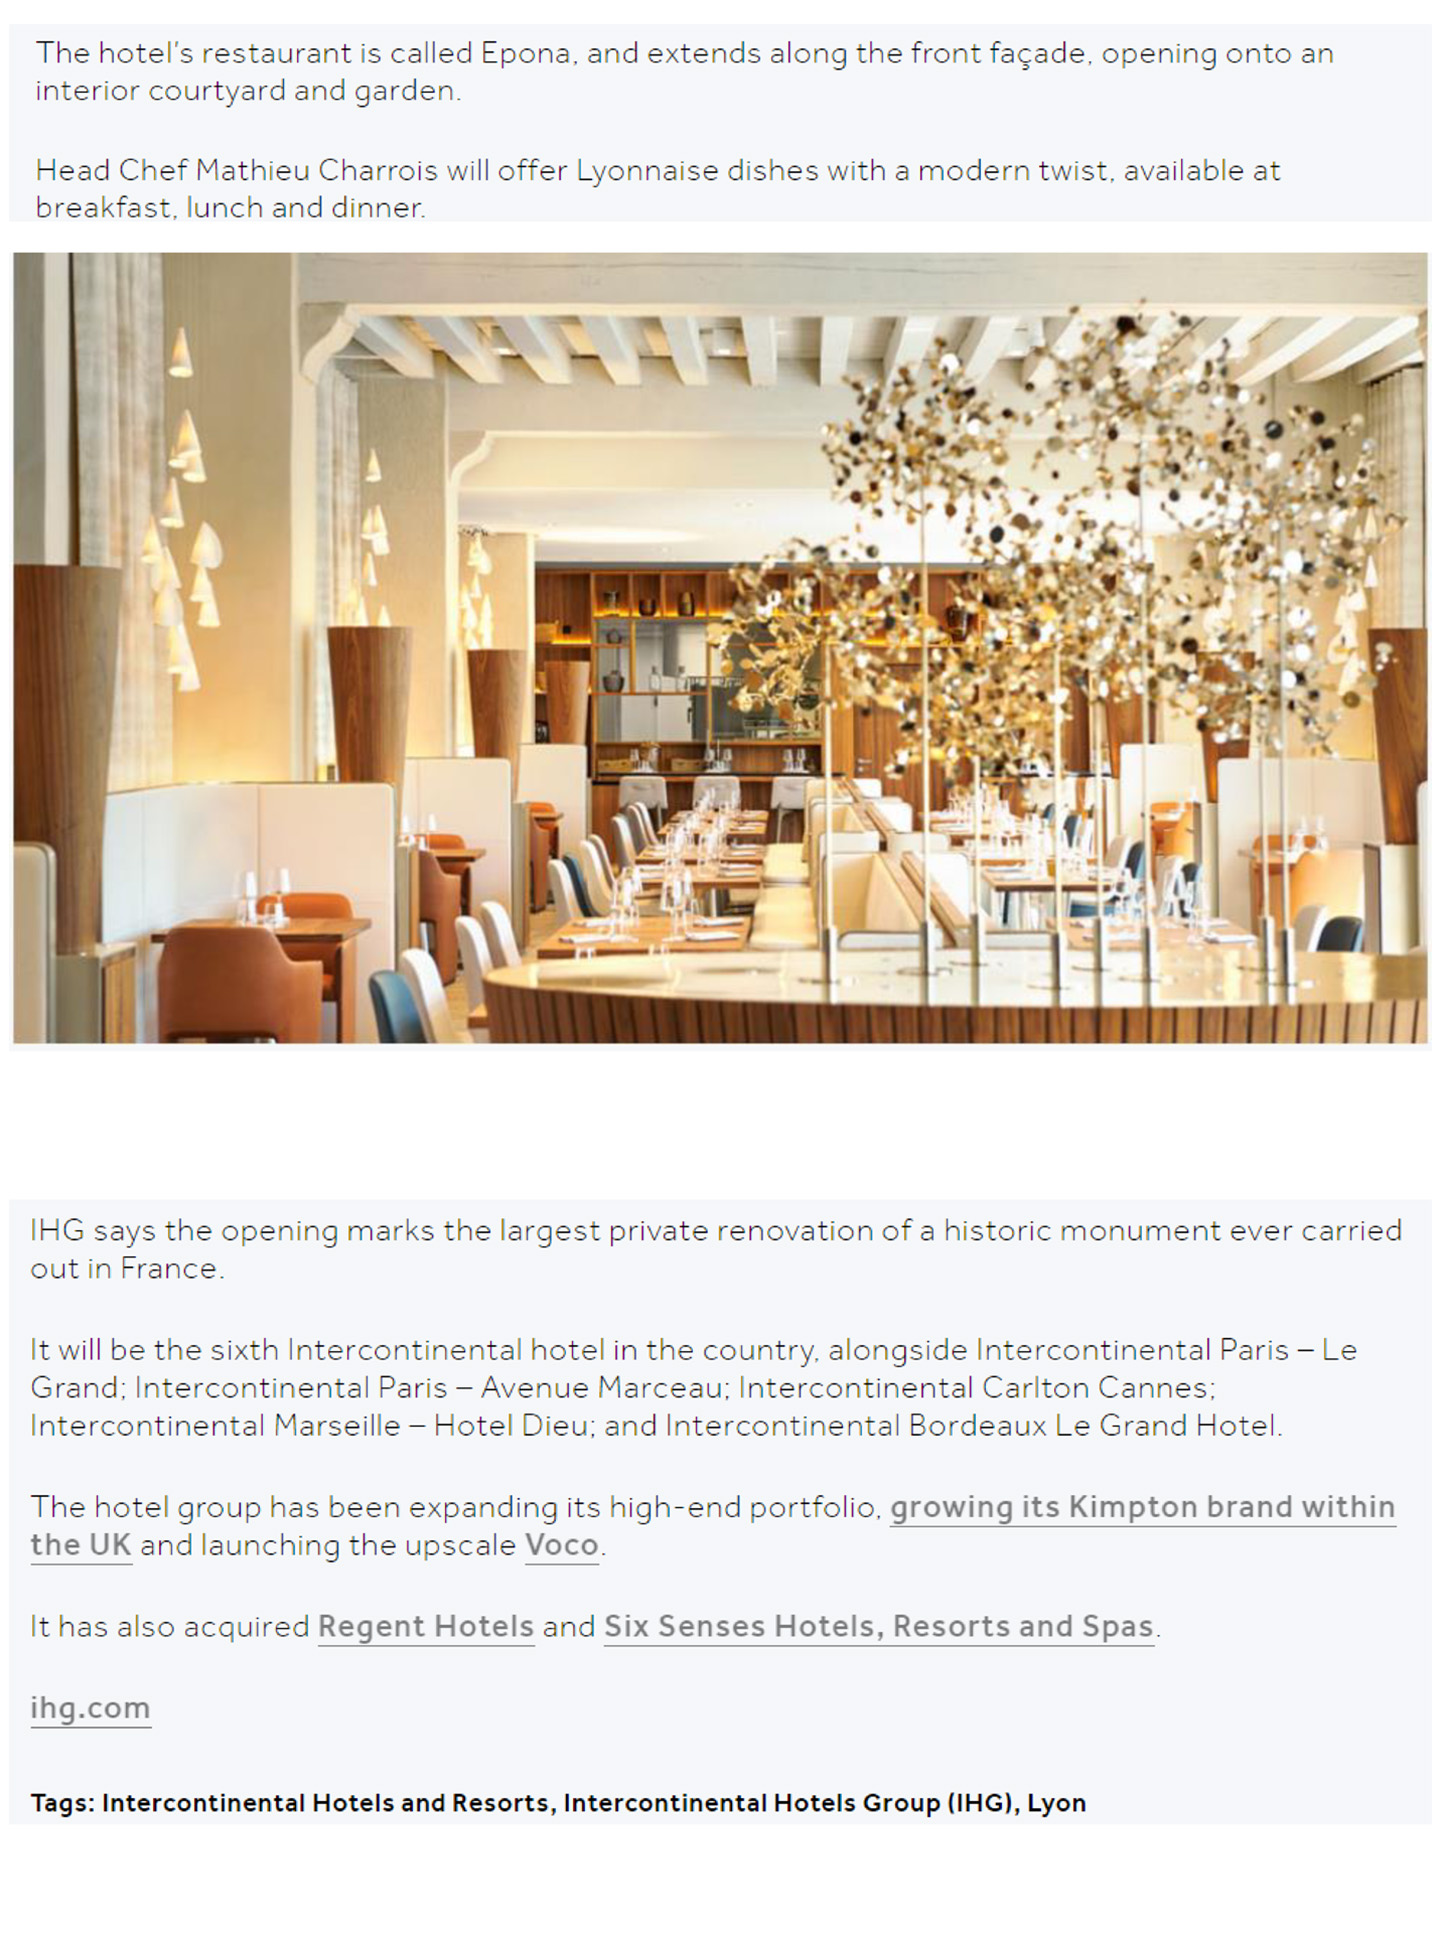 Article on the InterContinental Lyon - Hôtel Dieu realized by the studio jean-Philippe Nuel in the business traveller magazine, new hotel lifestyle, luxury interior design